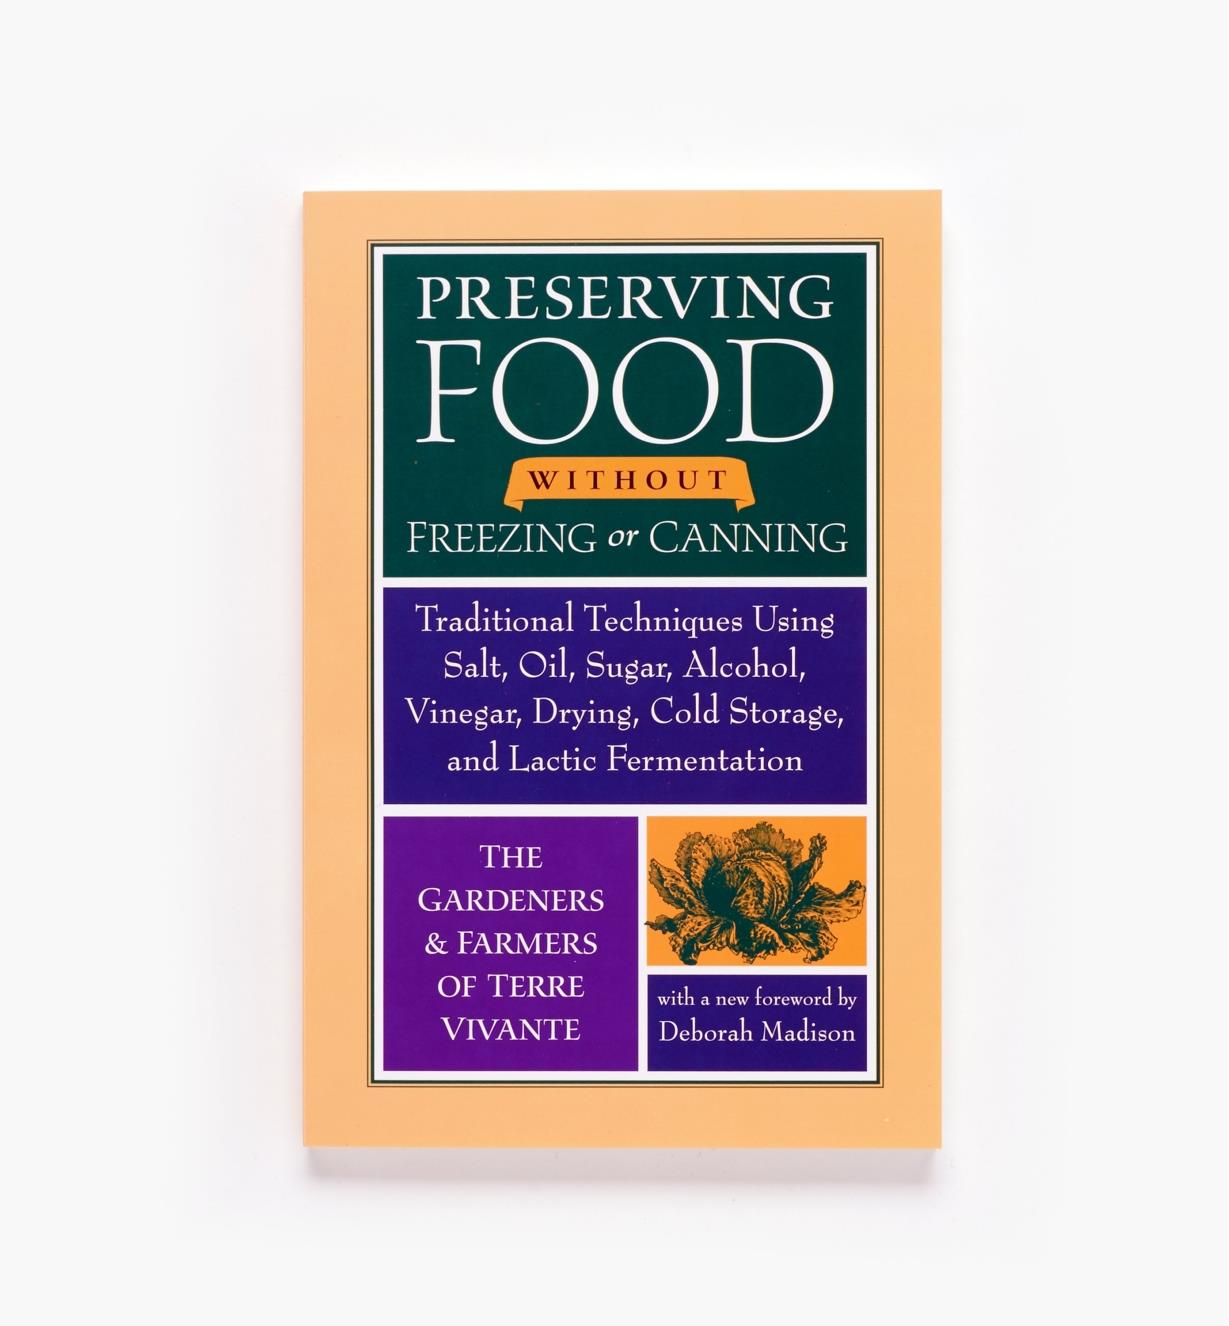 LA565 - Preserving Food Without Freezing or Canning